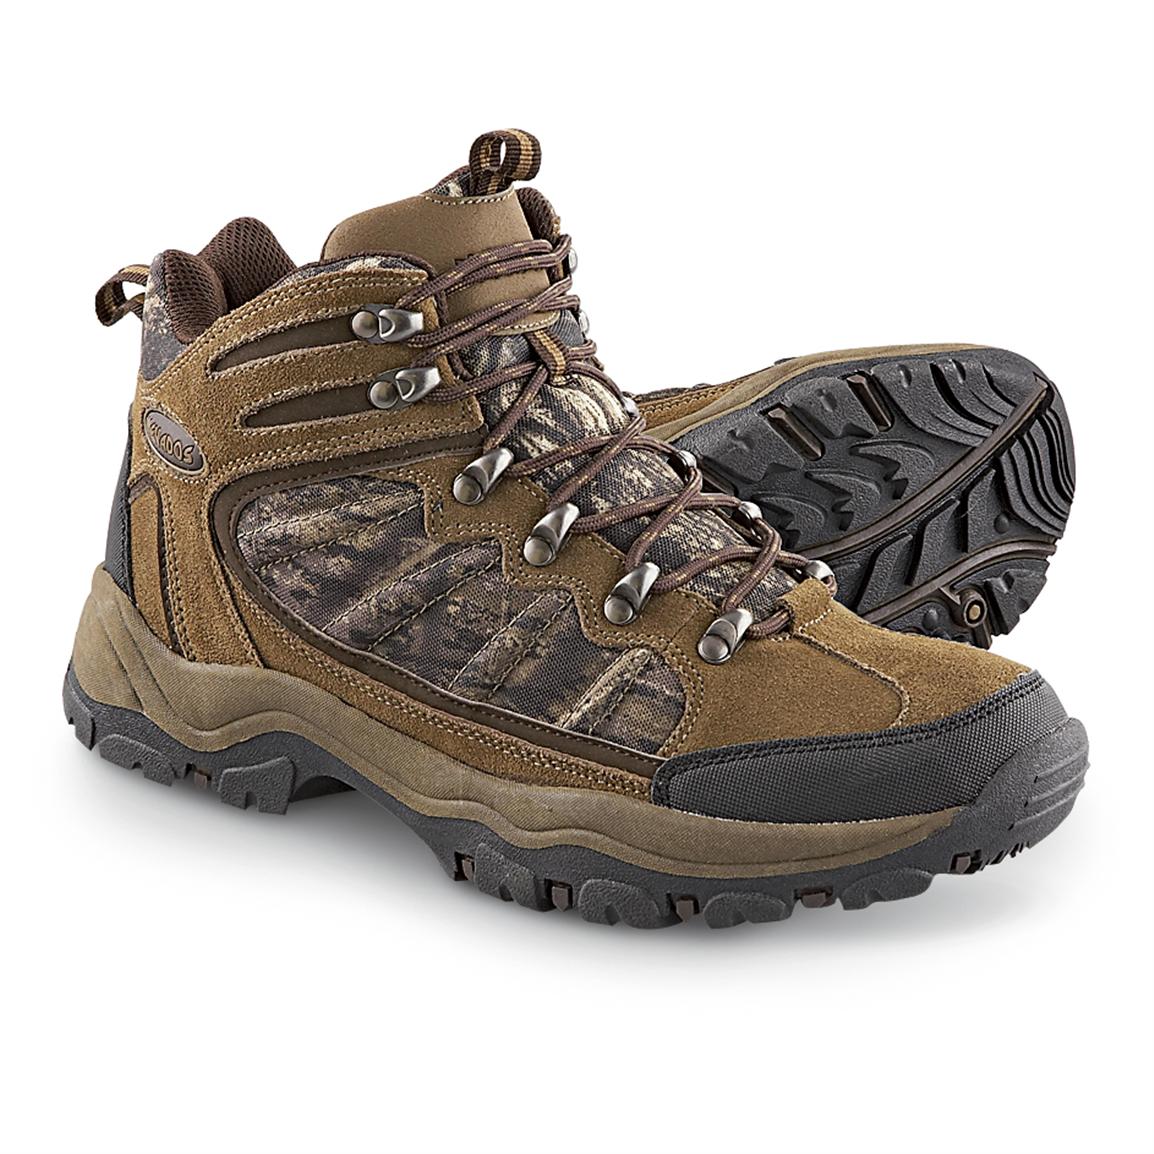 nevados hiking boots Boots nevados hiking vision mid brown shoes